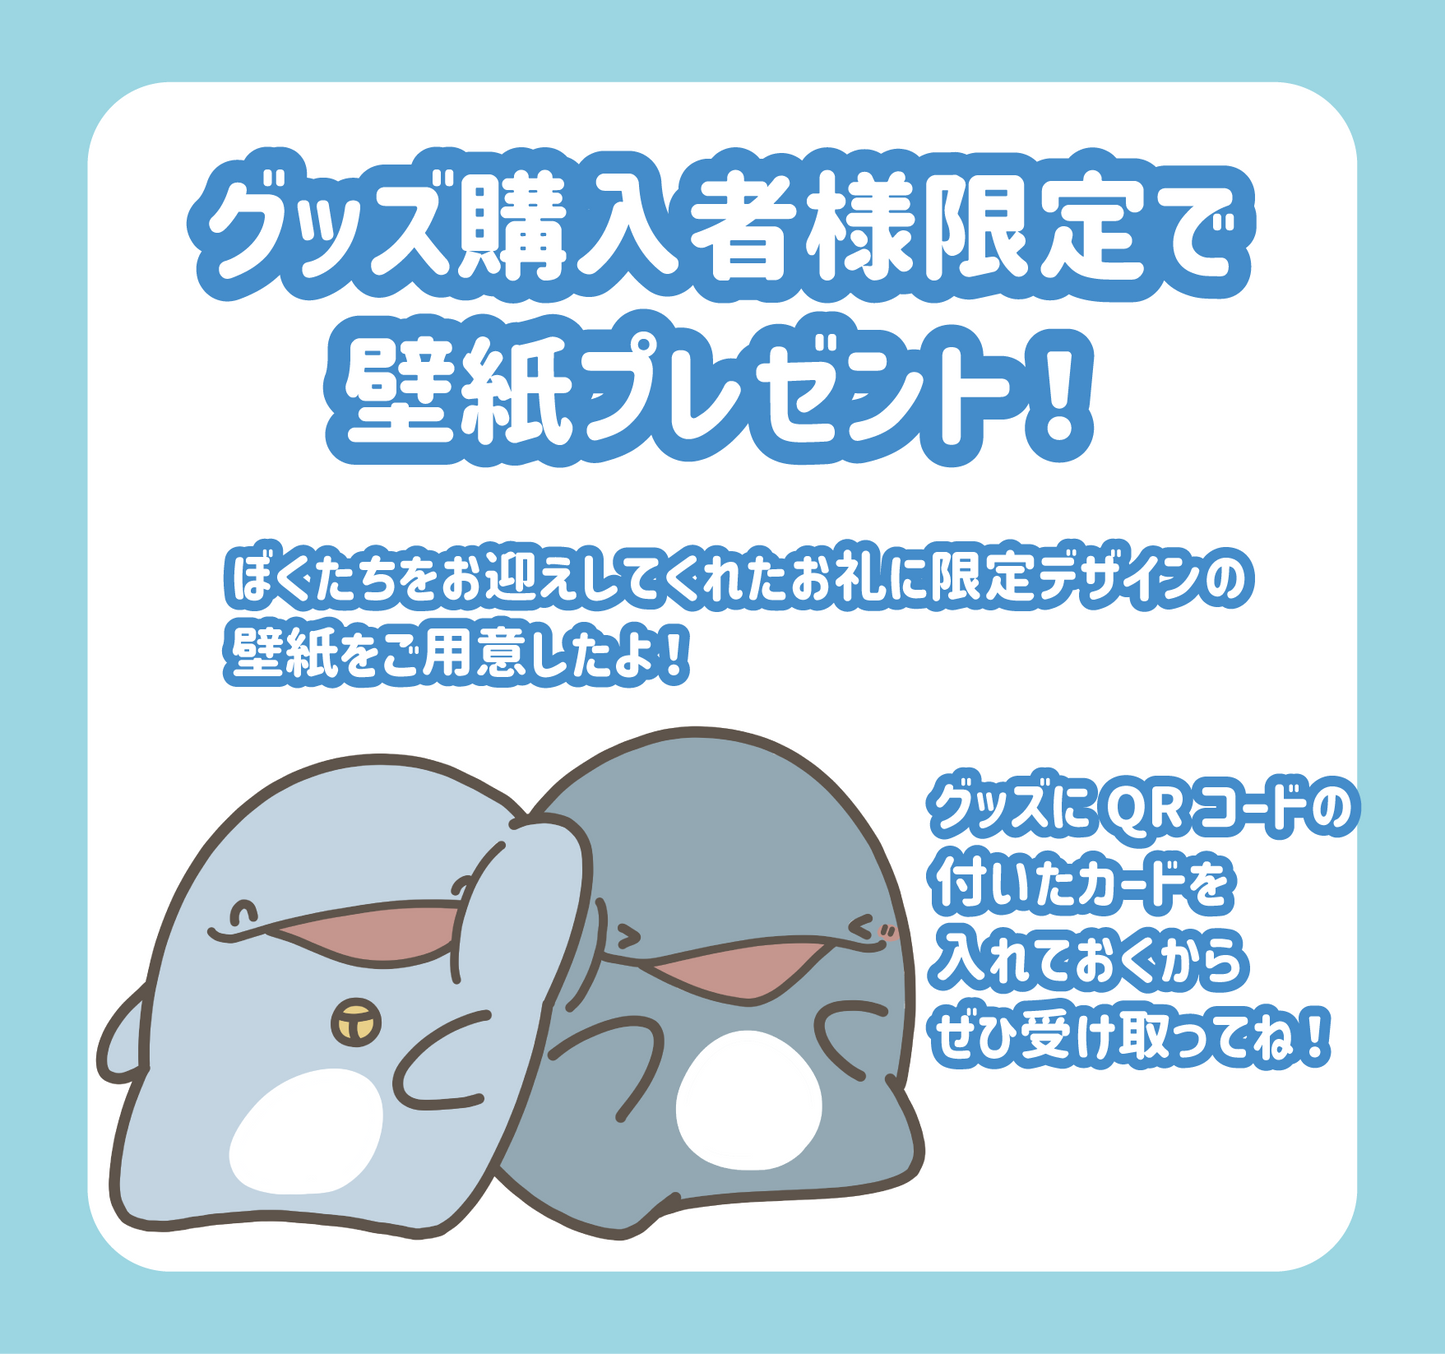 [Parent and child dolphin] Die-cut travel sticker (parent and child dolphin) [Shipped in early April]